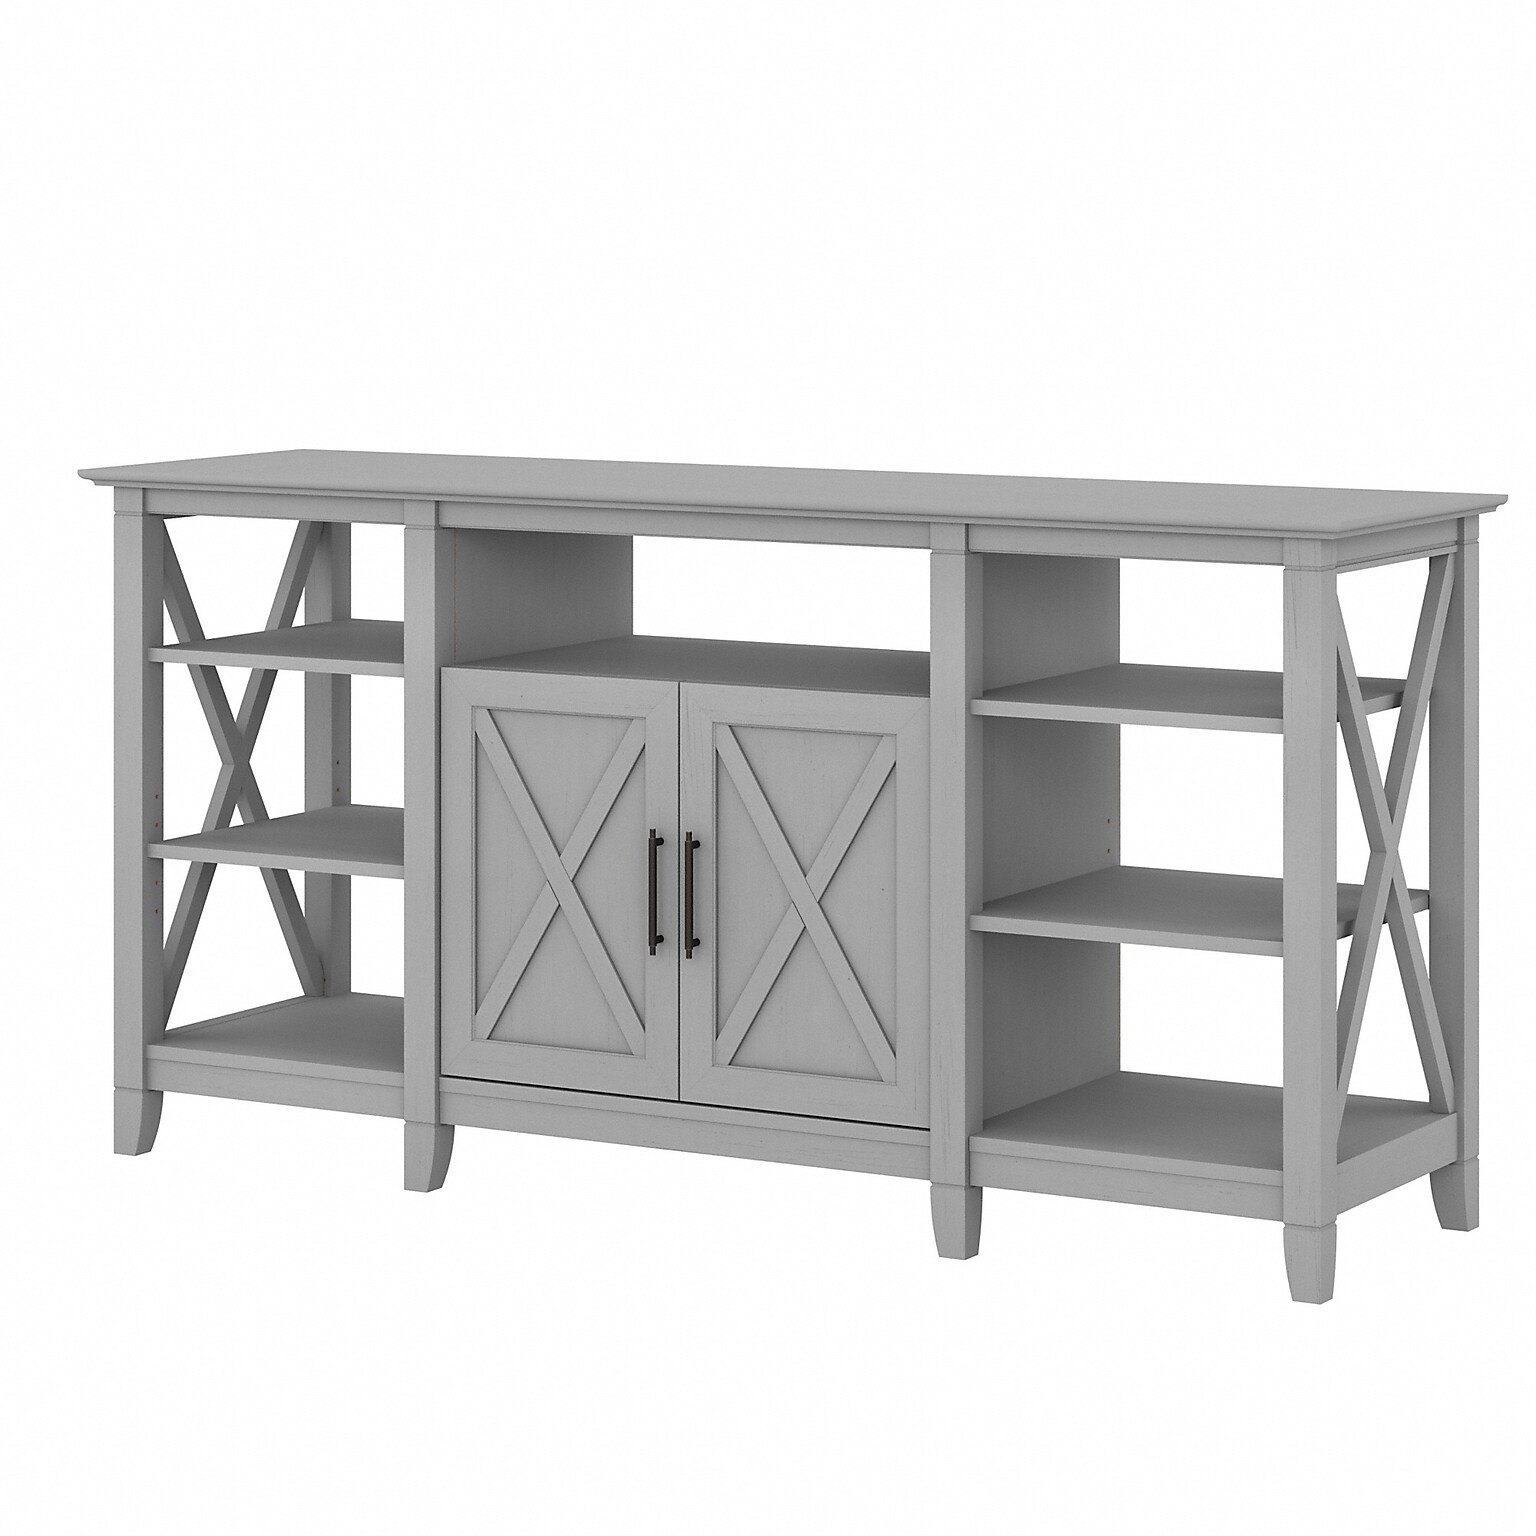 Bush Furniture Key West Console TV Stand, Screens up to 65, Cape Cod Gray (KWV160CG-03)